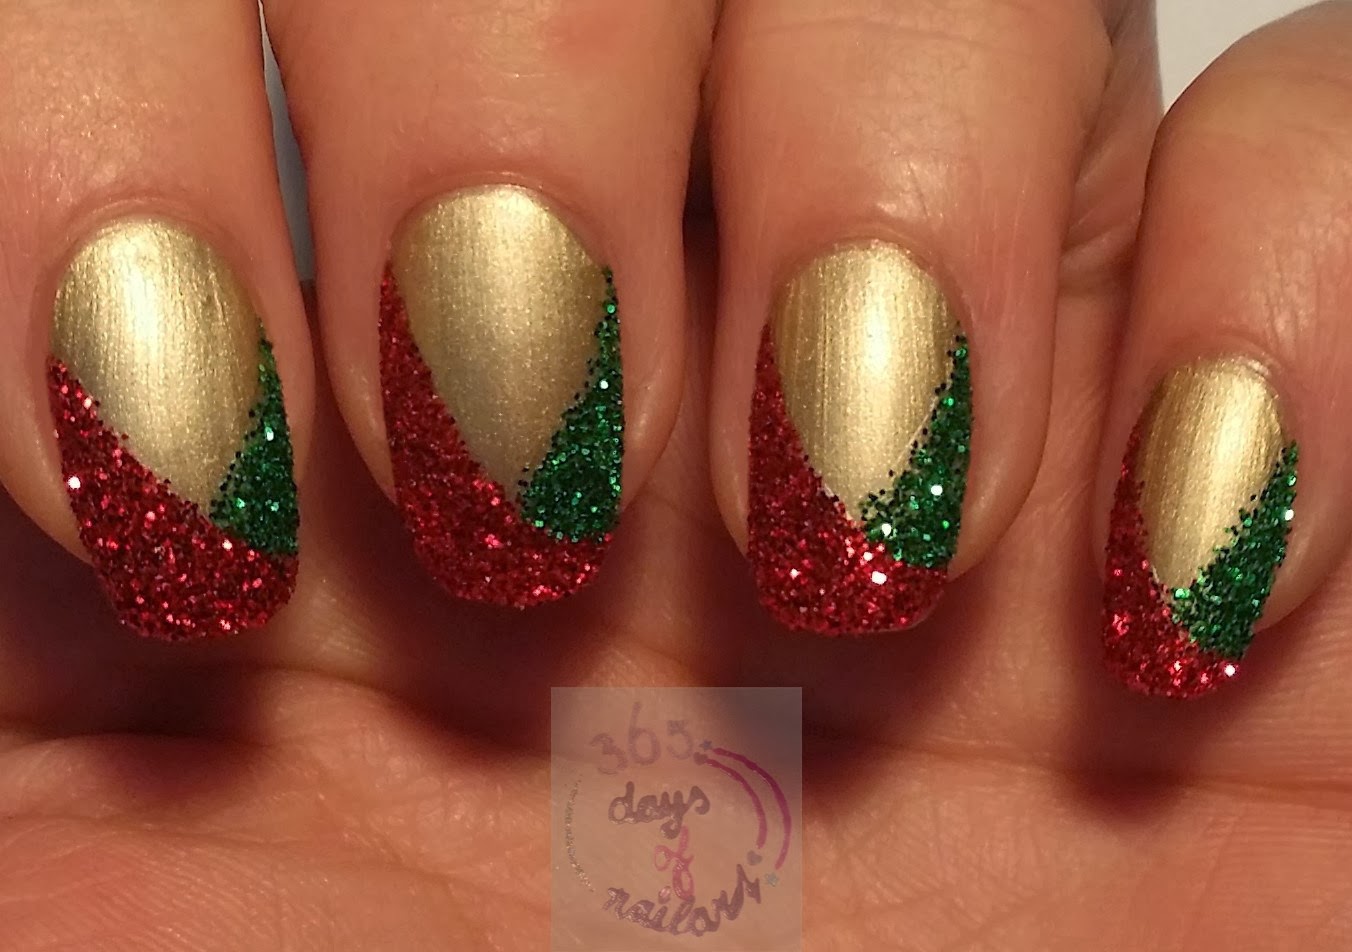 2. Easy Holiday Gel Nails - wide 3